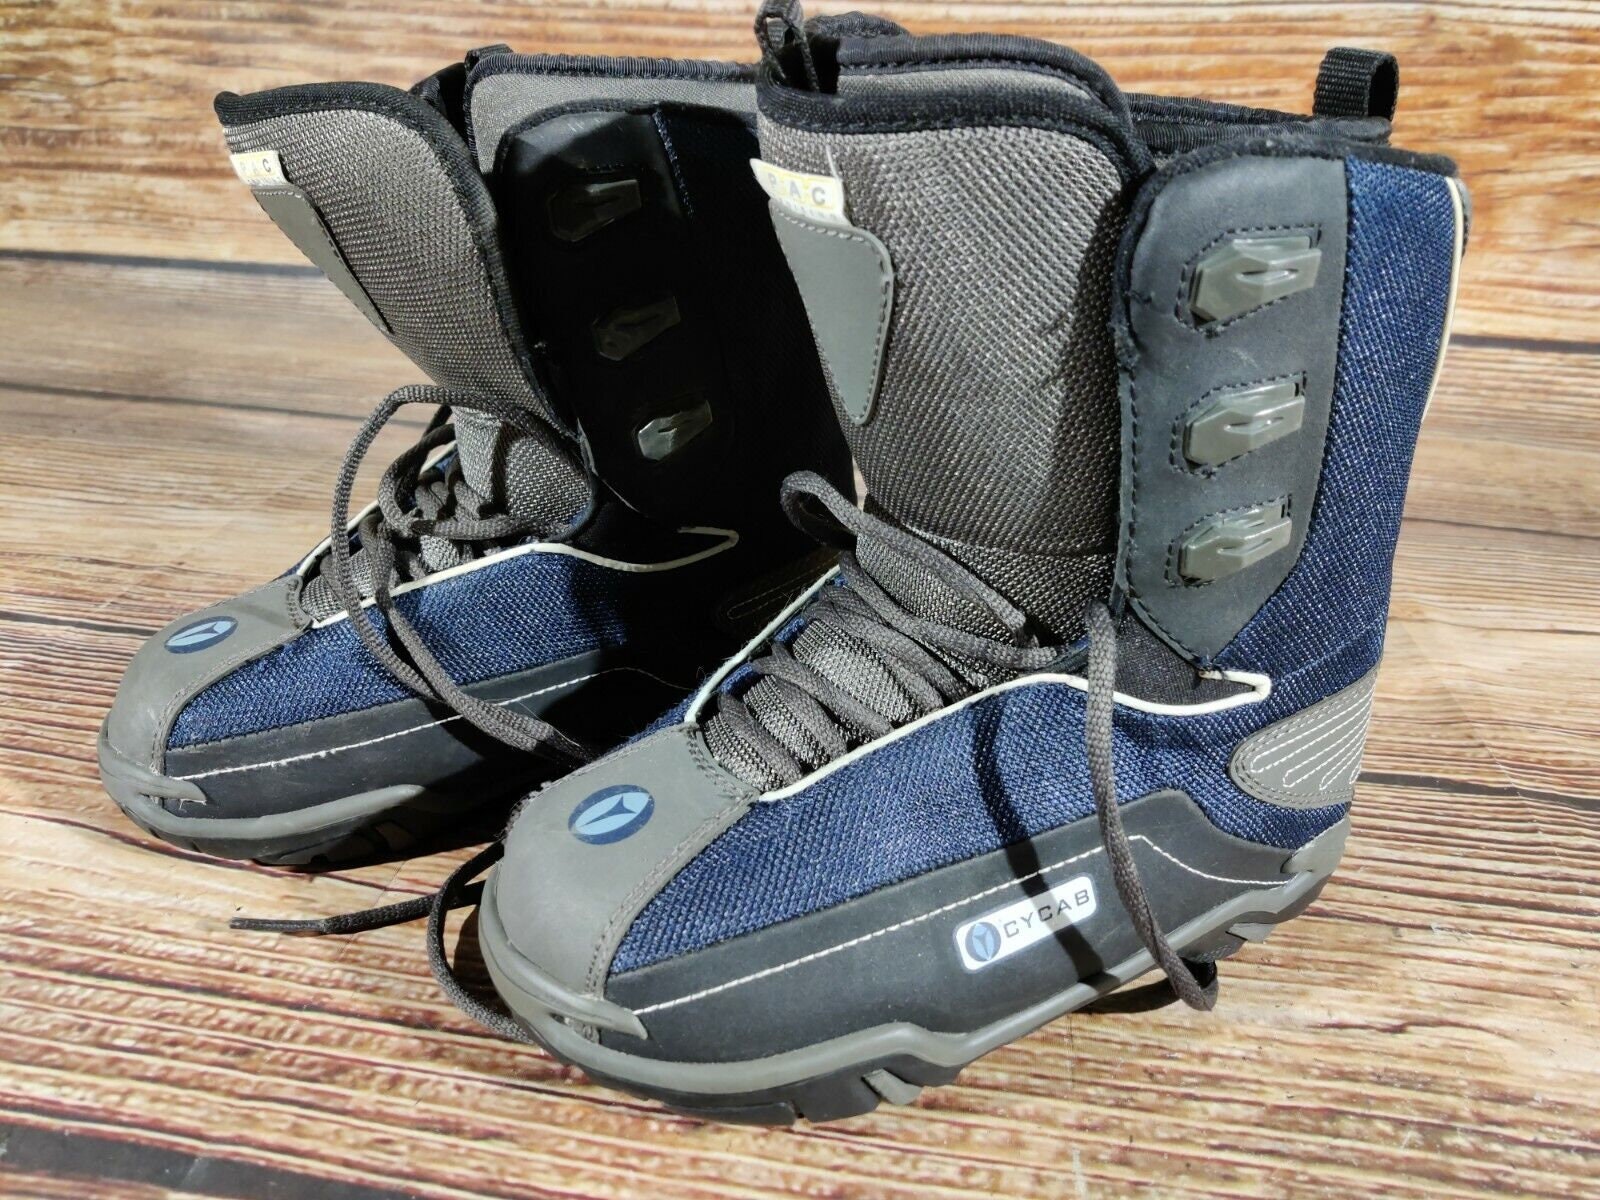 spanning Redenaar plannen CYCAB Snowboard Boots Youth Kids Size EU36 US4.5 UK3.5 - Etsy